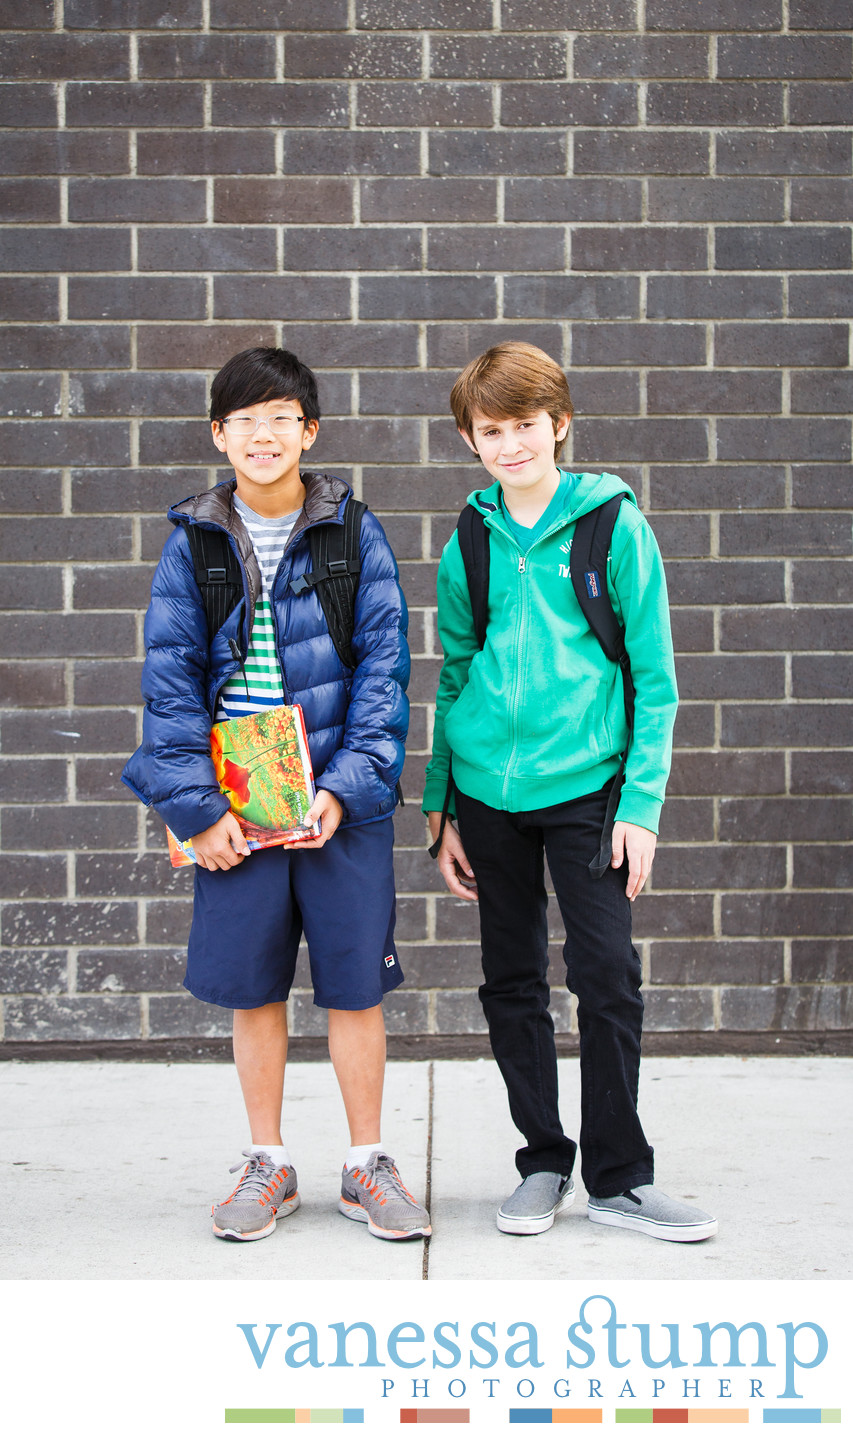 Outdoor portrait of two boys with backpacks